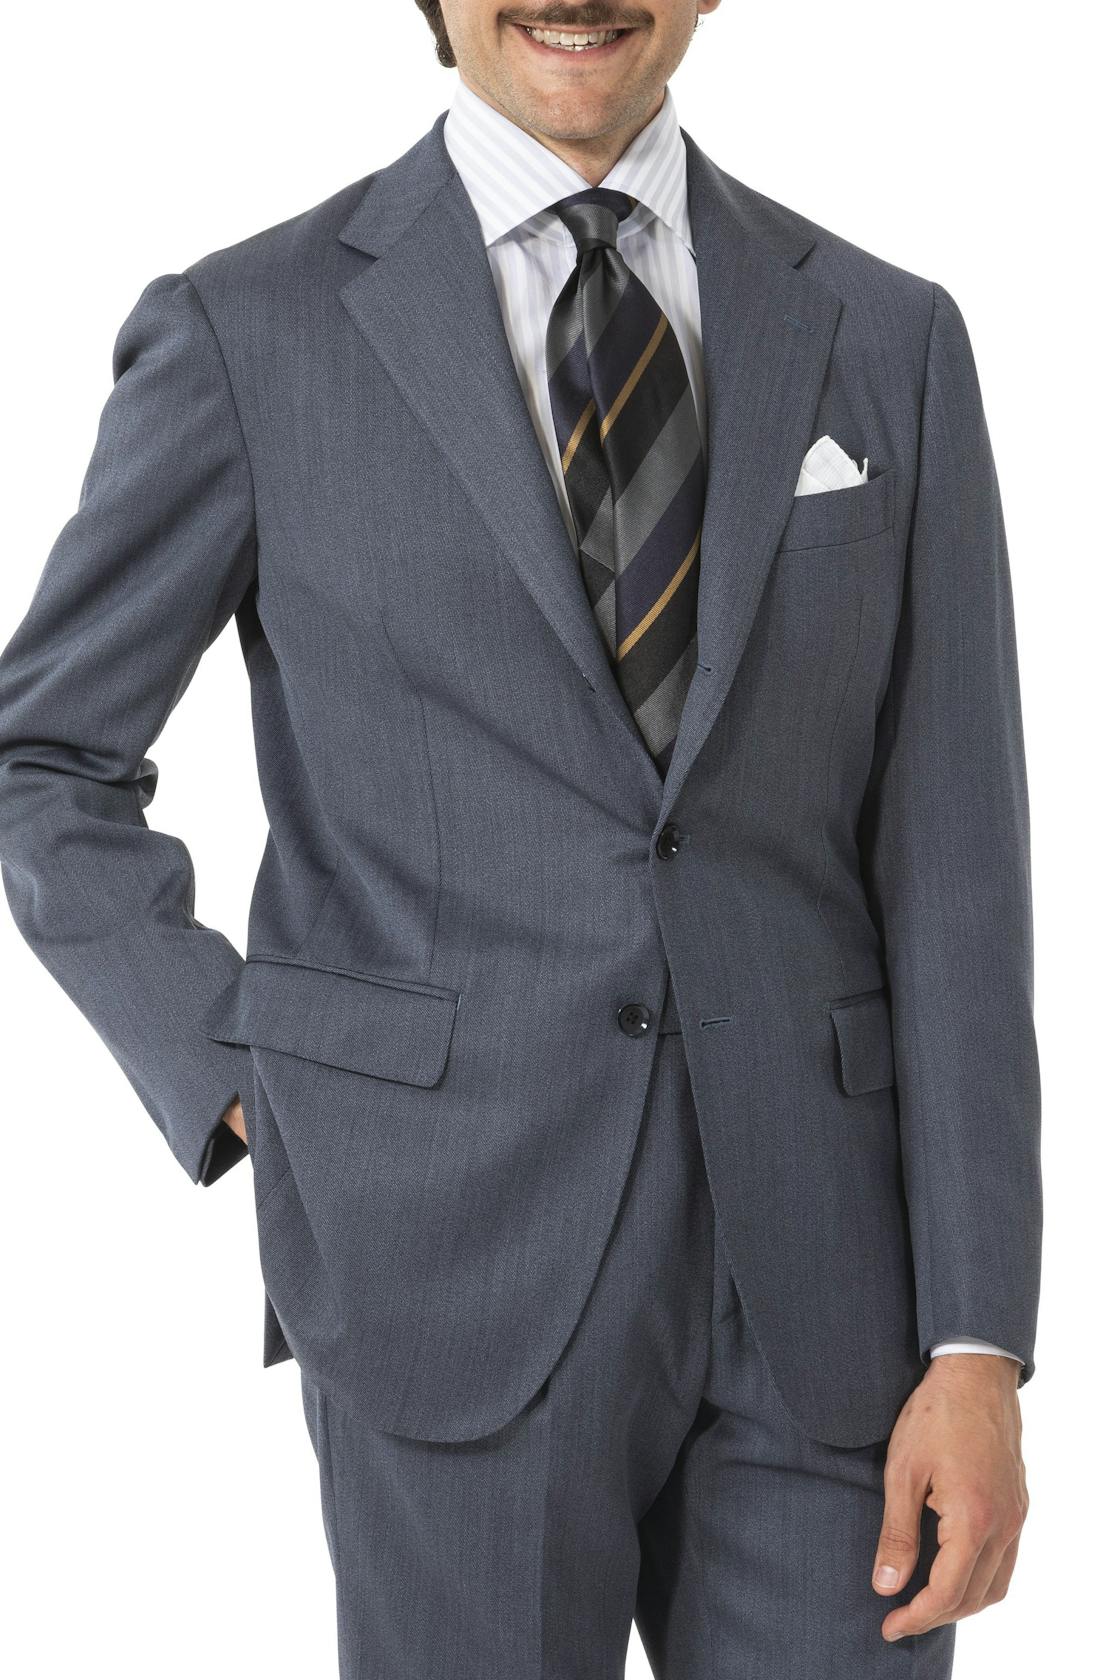 The Armoury by Ring Jacket Model 3B Denim Blue Wool Covert Suit